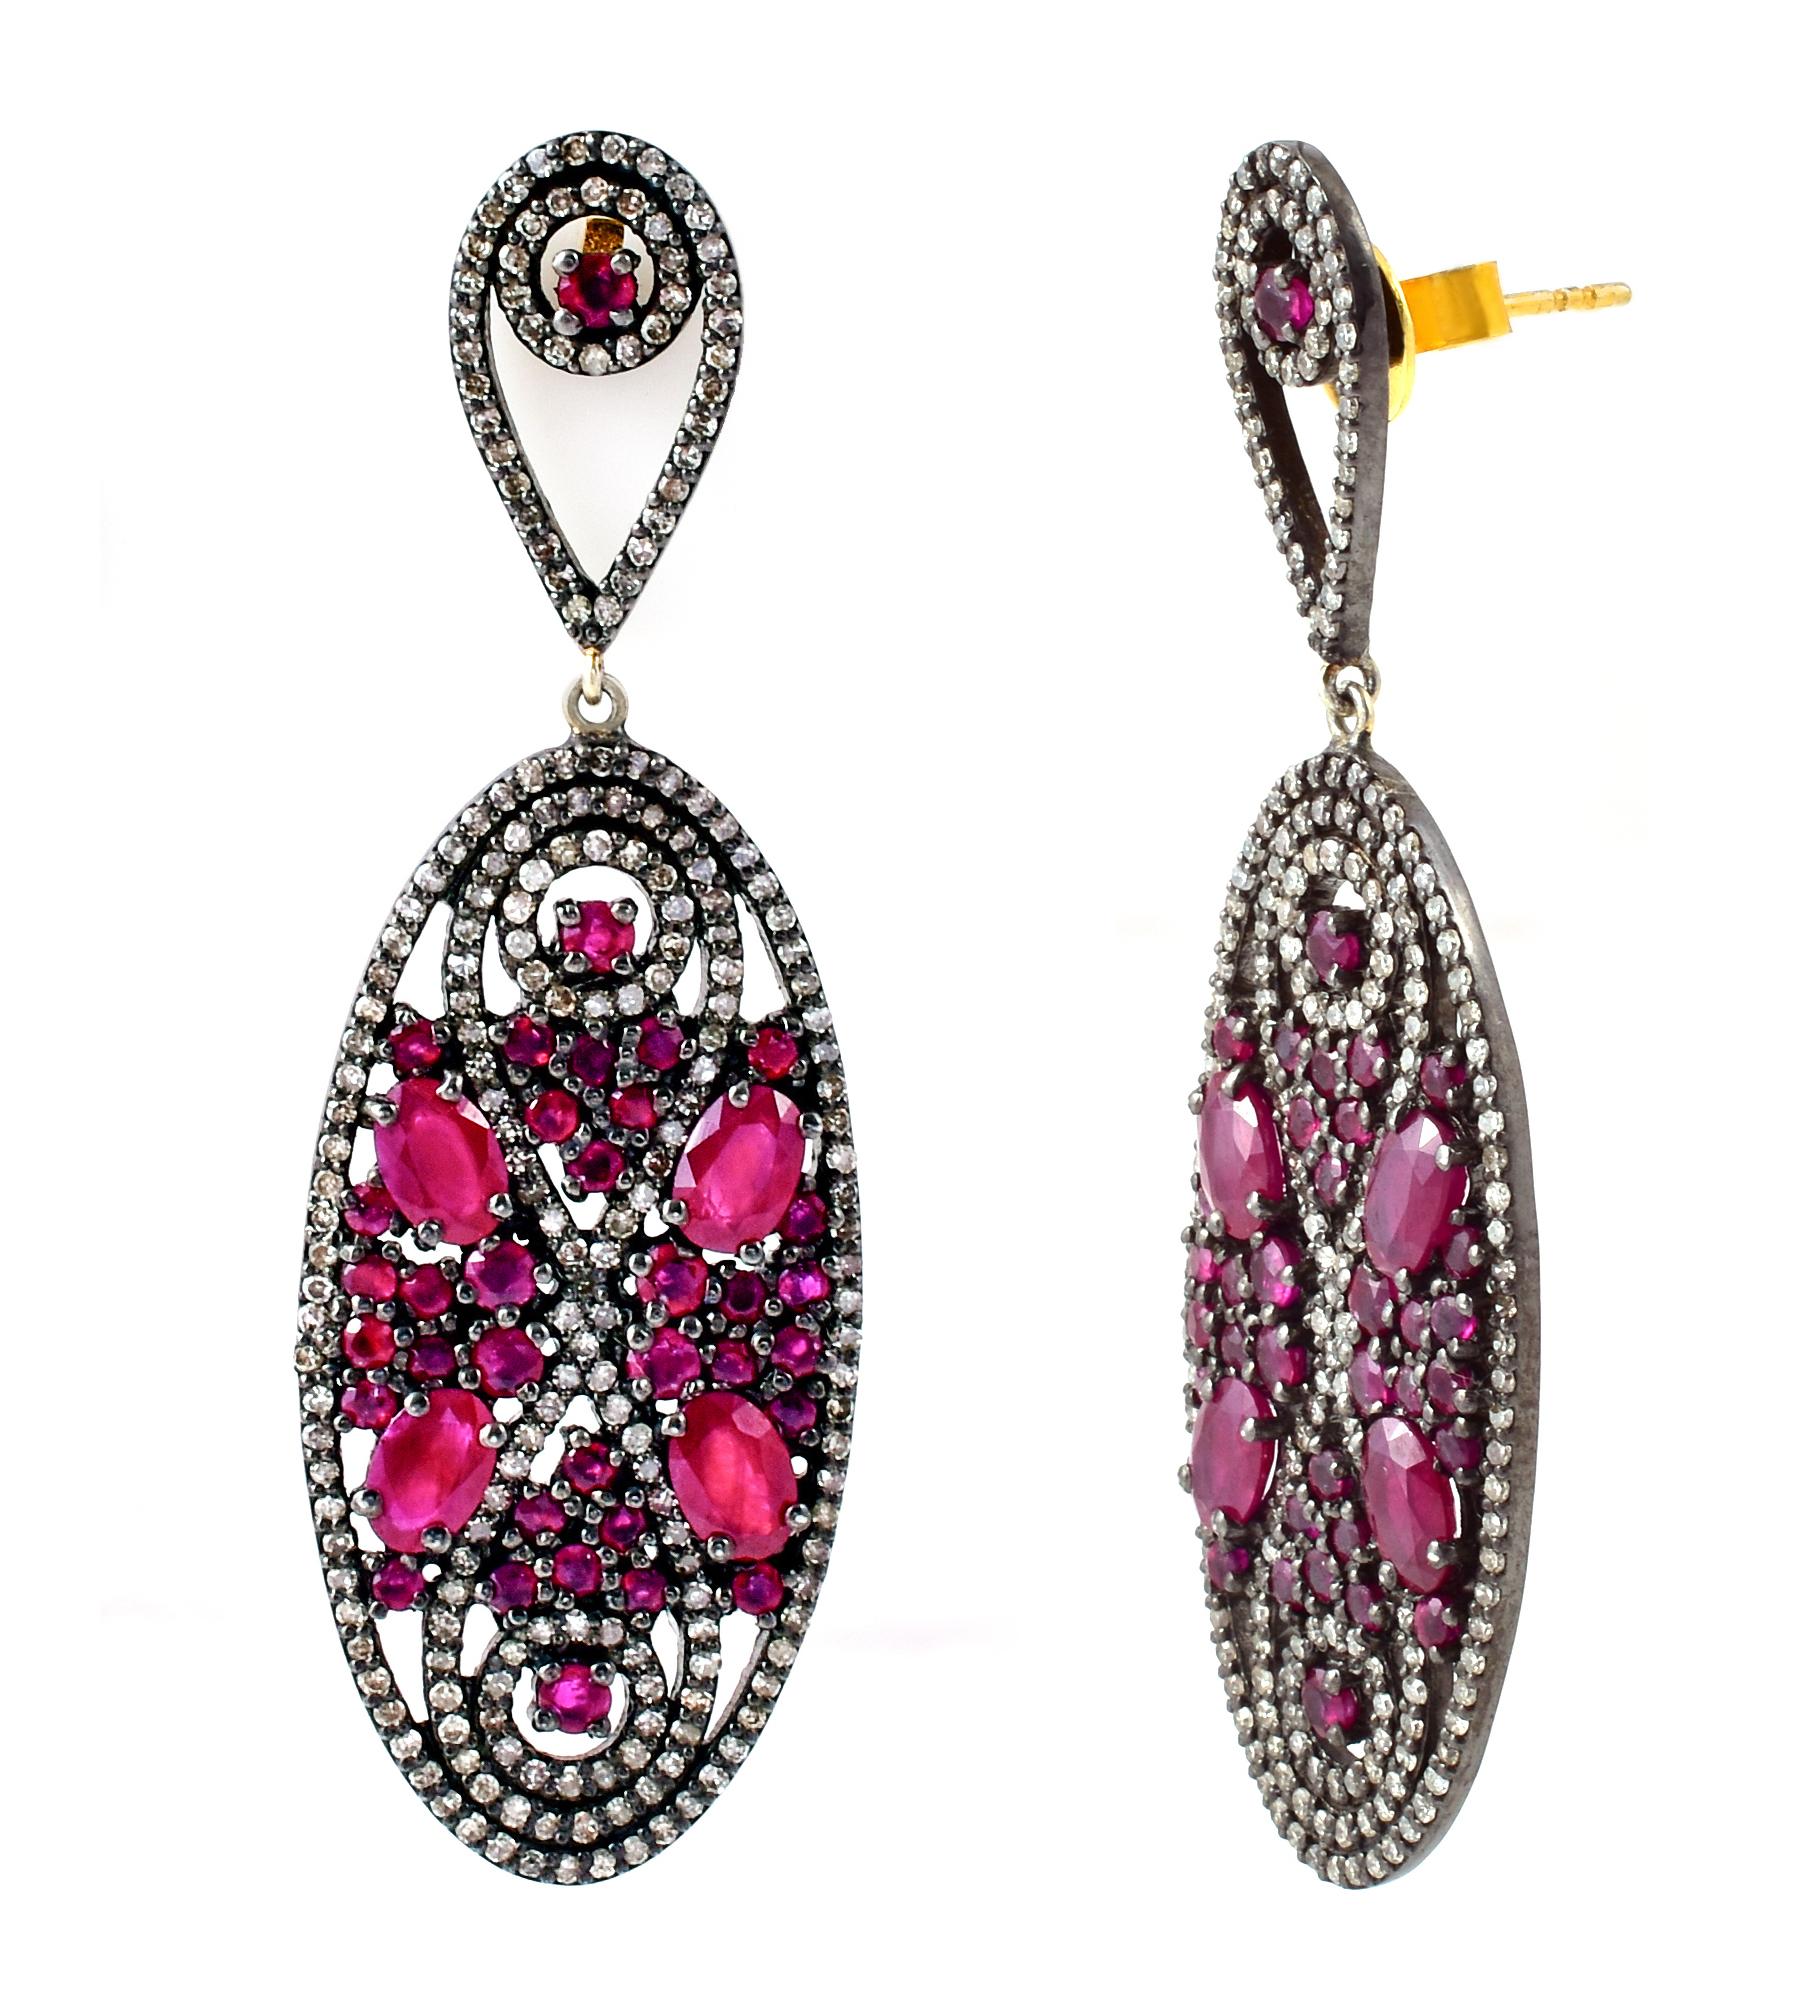 11.42 Carat Diamond and Ruby Drop Earrings in Victorian Style

This Victorian style crimson red ruby and diamond hanging earring is magnanimous. The bottom oval shape formed with a single row of pave set diamonds creates the perfect border. The